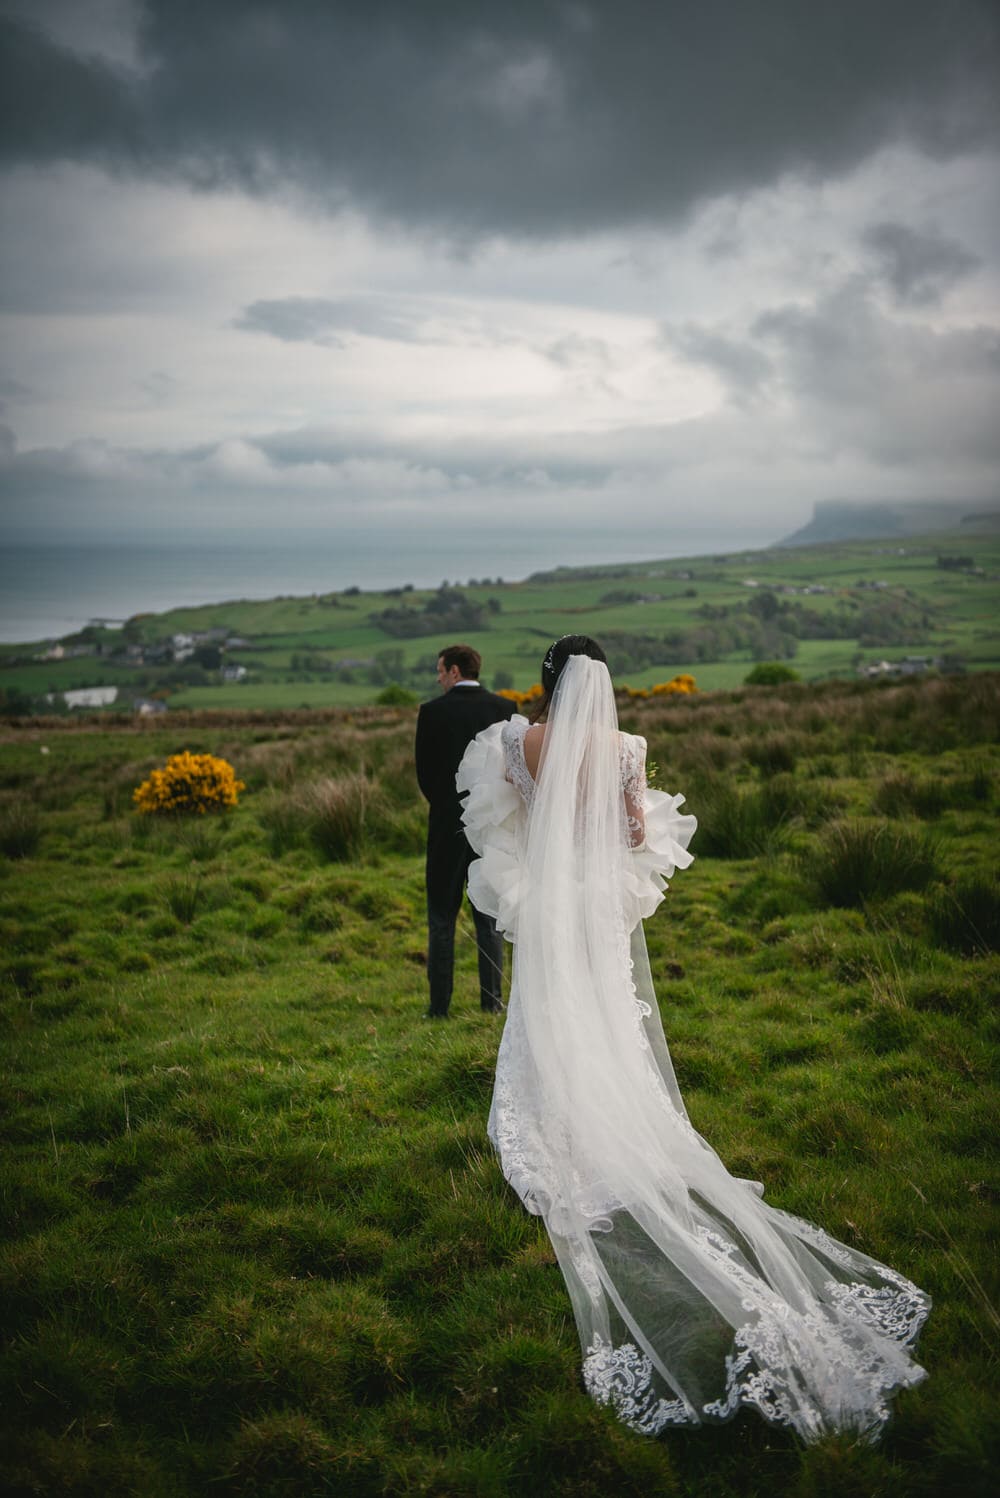 A loving couple embracing during their Northern Ireland elopement on the coastline.